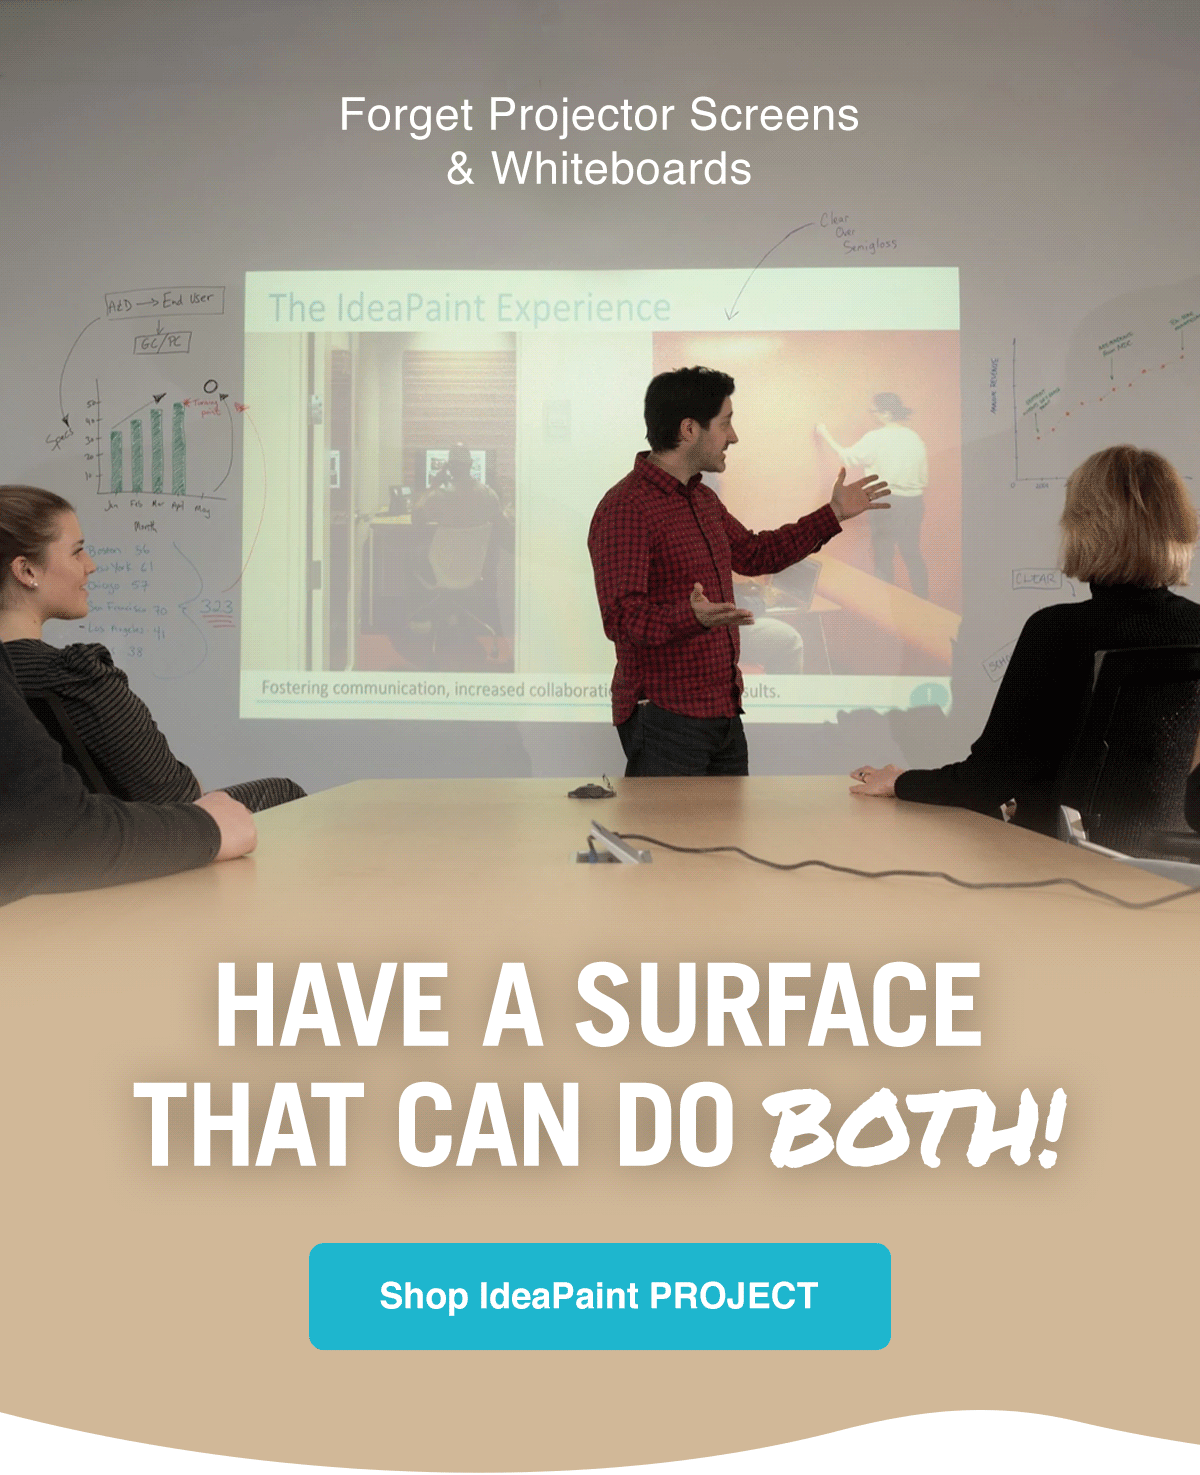 Forget Projector Screens & Whiteboards. Have a surface that can do both!